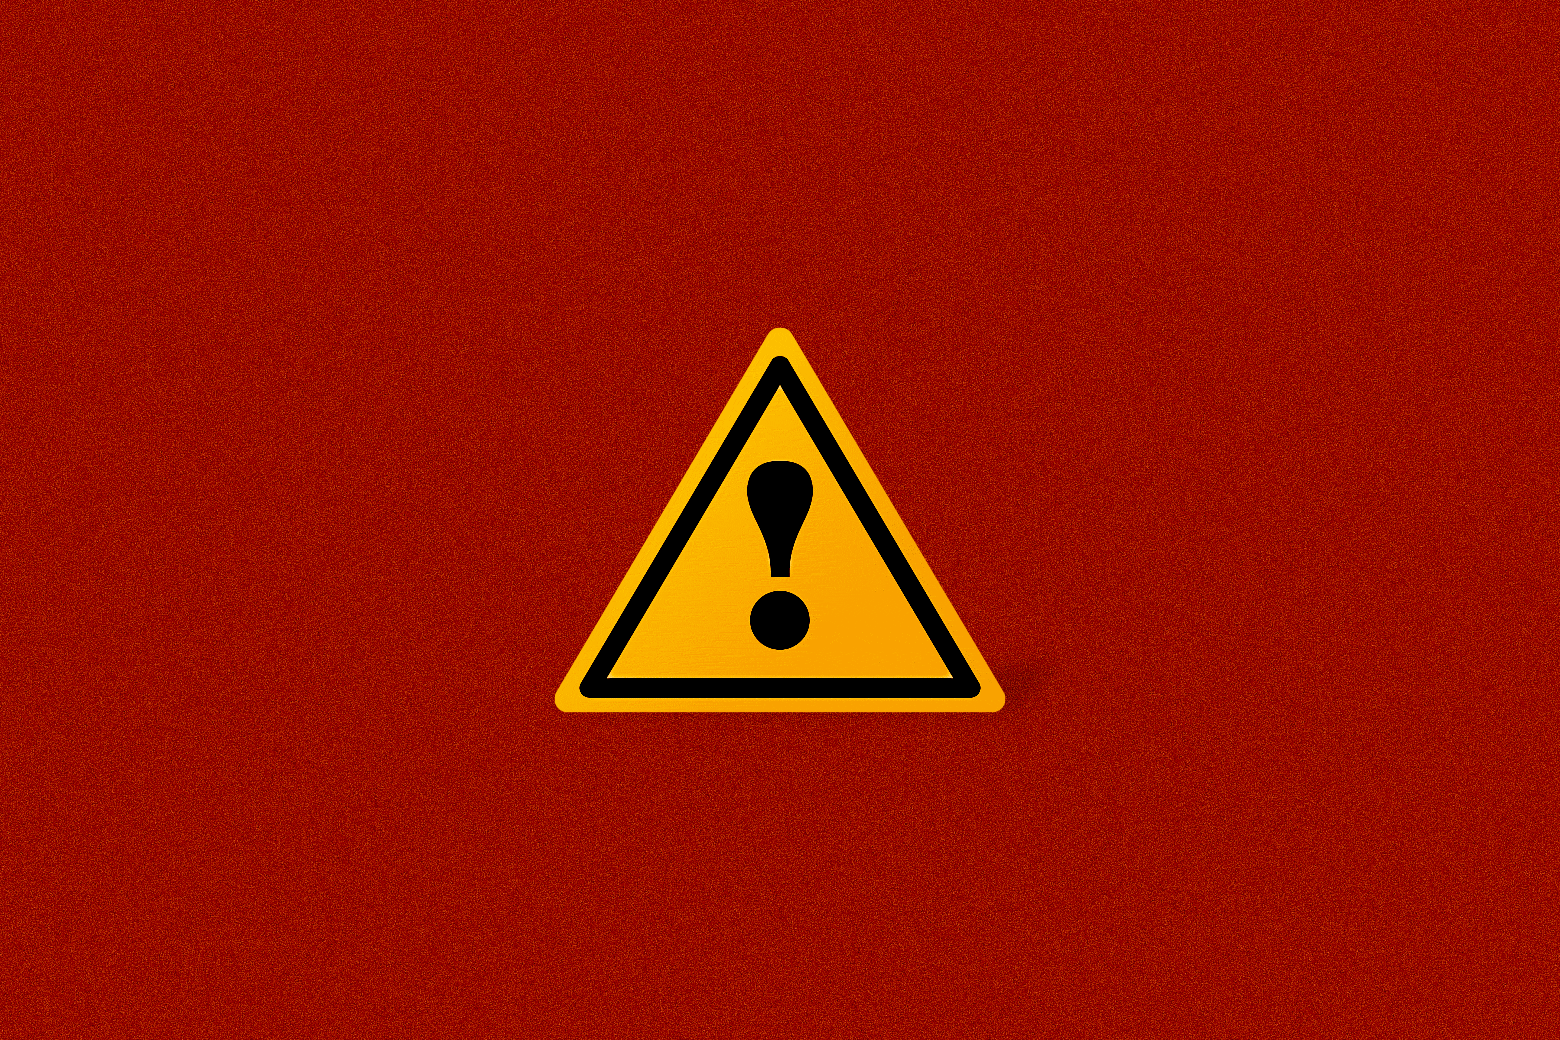 A blinking caution sign against a fuzzy red background